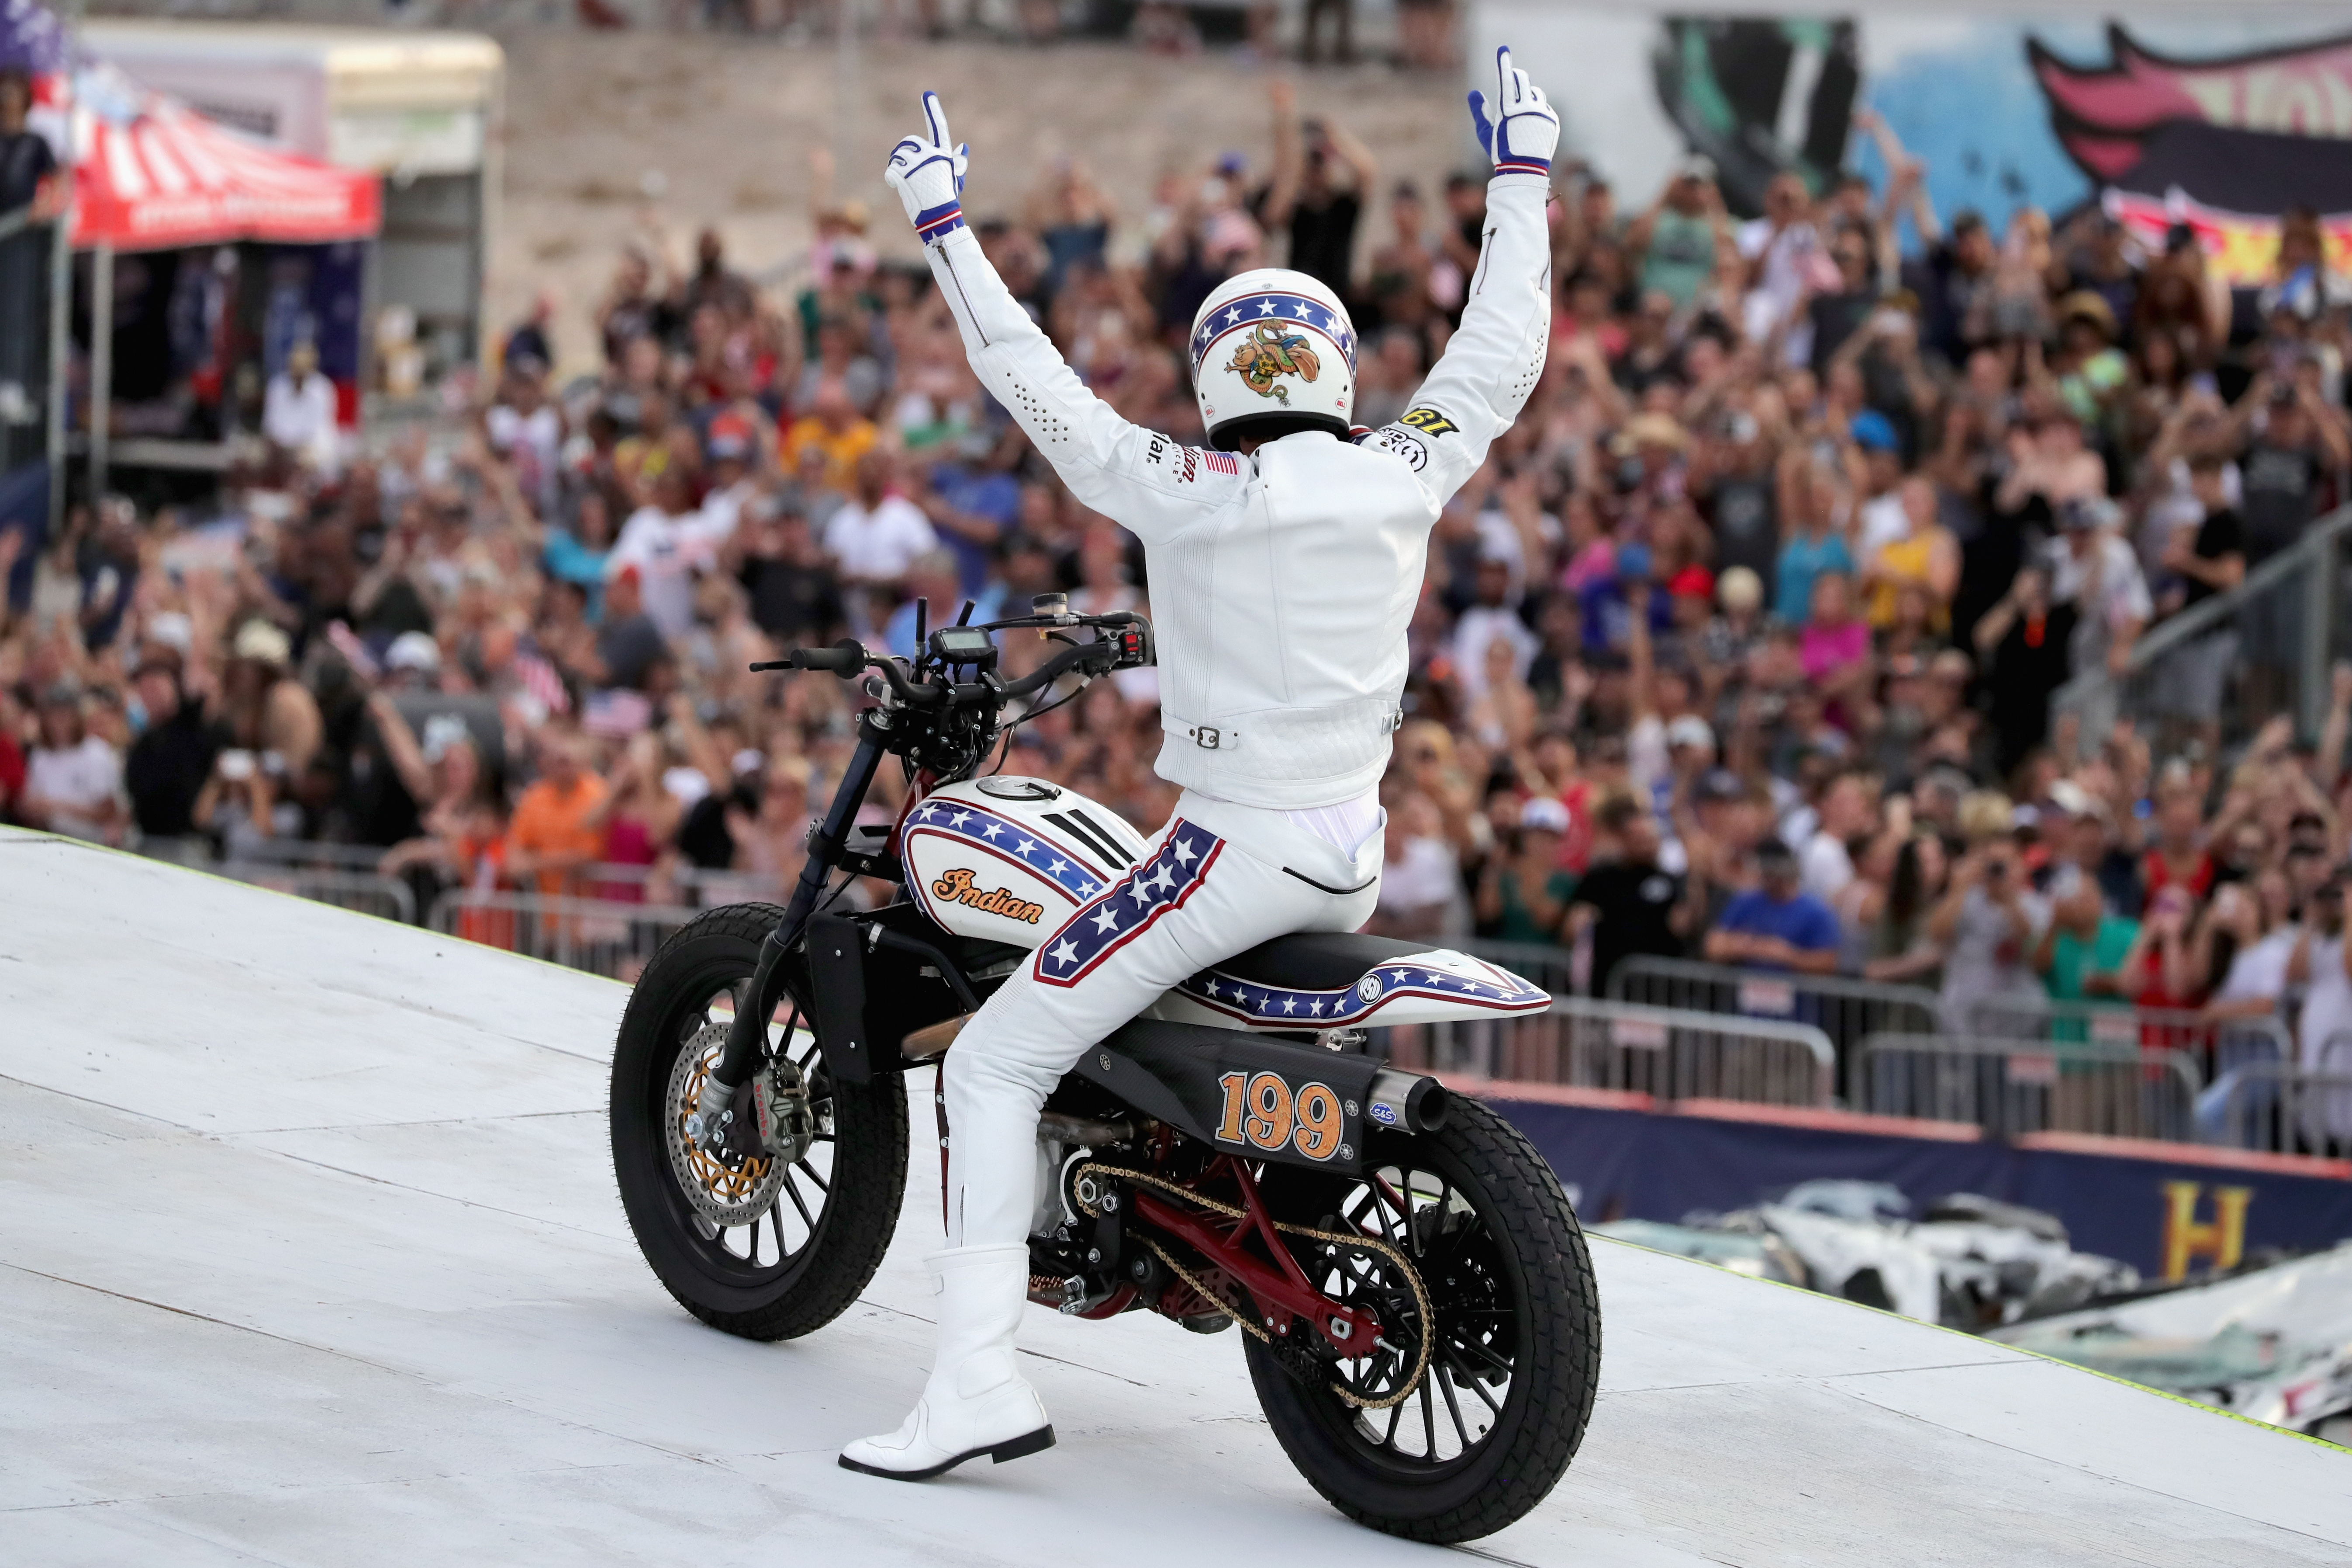 LAS VEGAS, NV - JULY 08:  Travis Pastrana peforms during HISTORY's Live Event "Evel Live" on July 8, 2018 in Las Vegas, Nevada.  (Photo by Neilson Barnard/Getty Images for HISTORY)